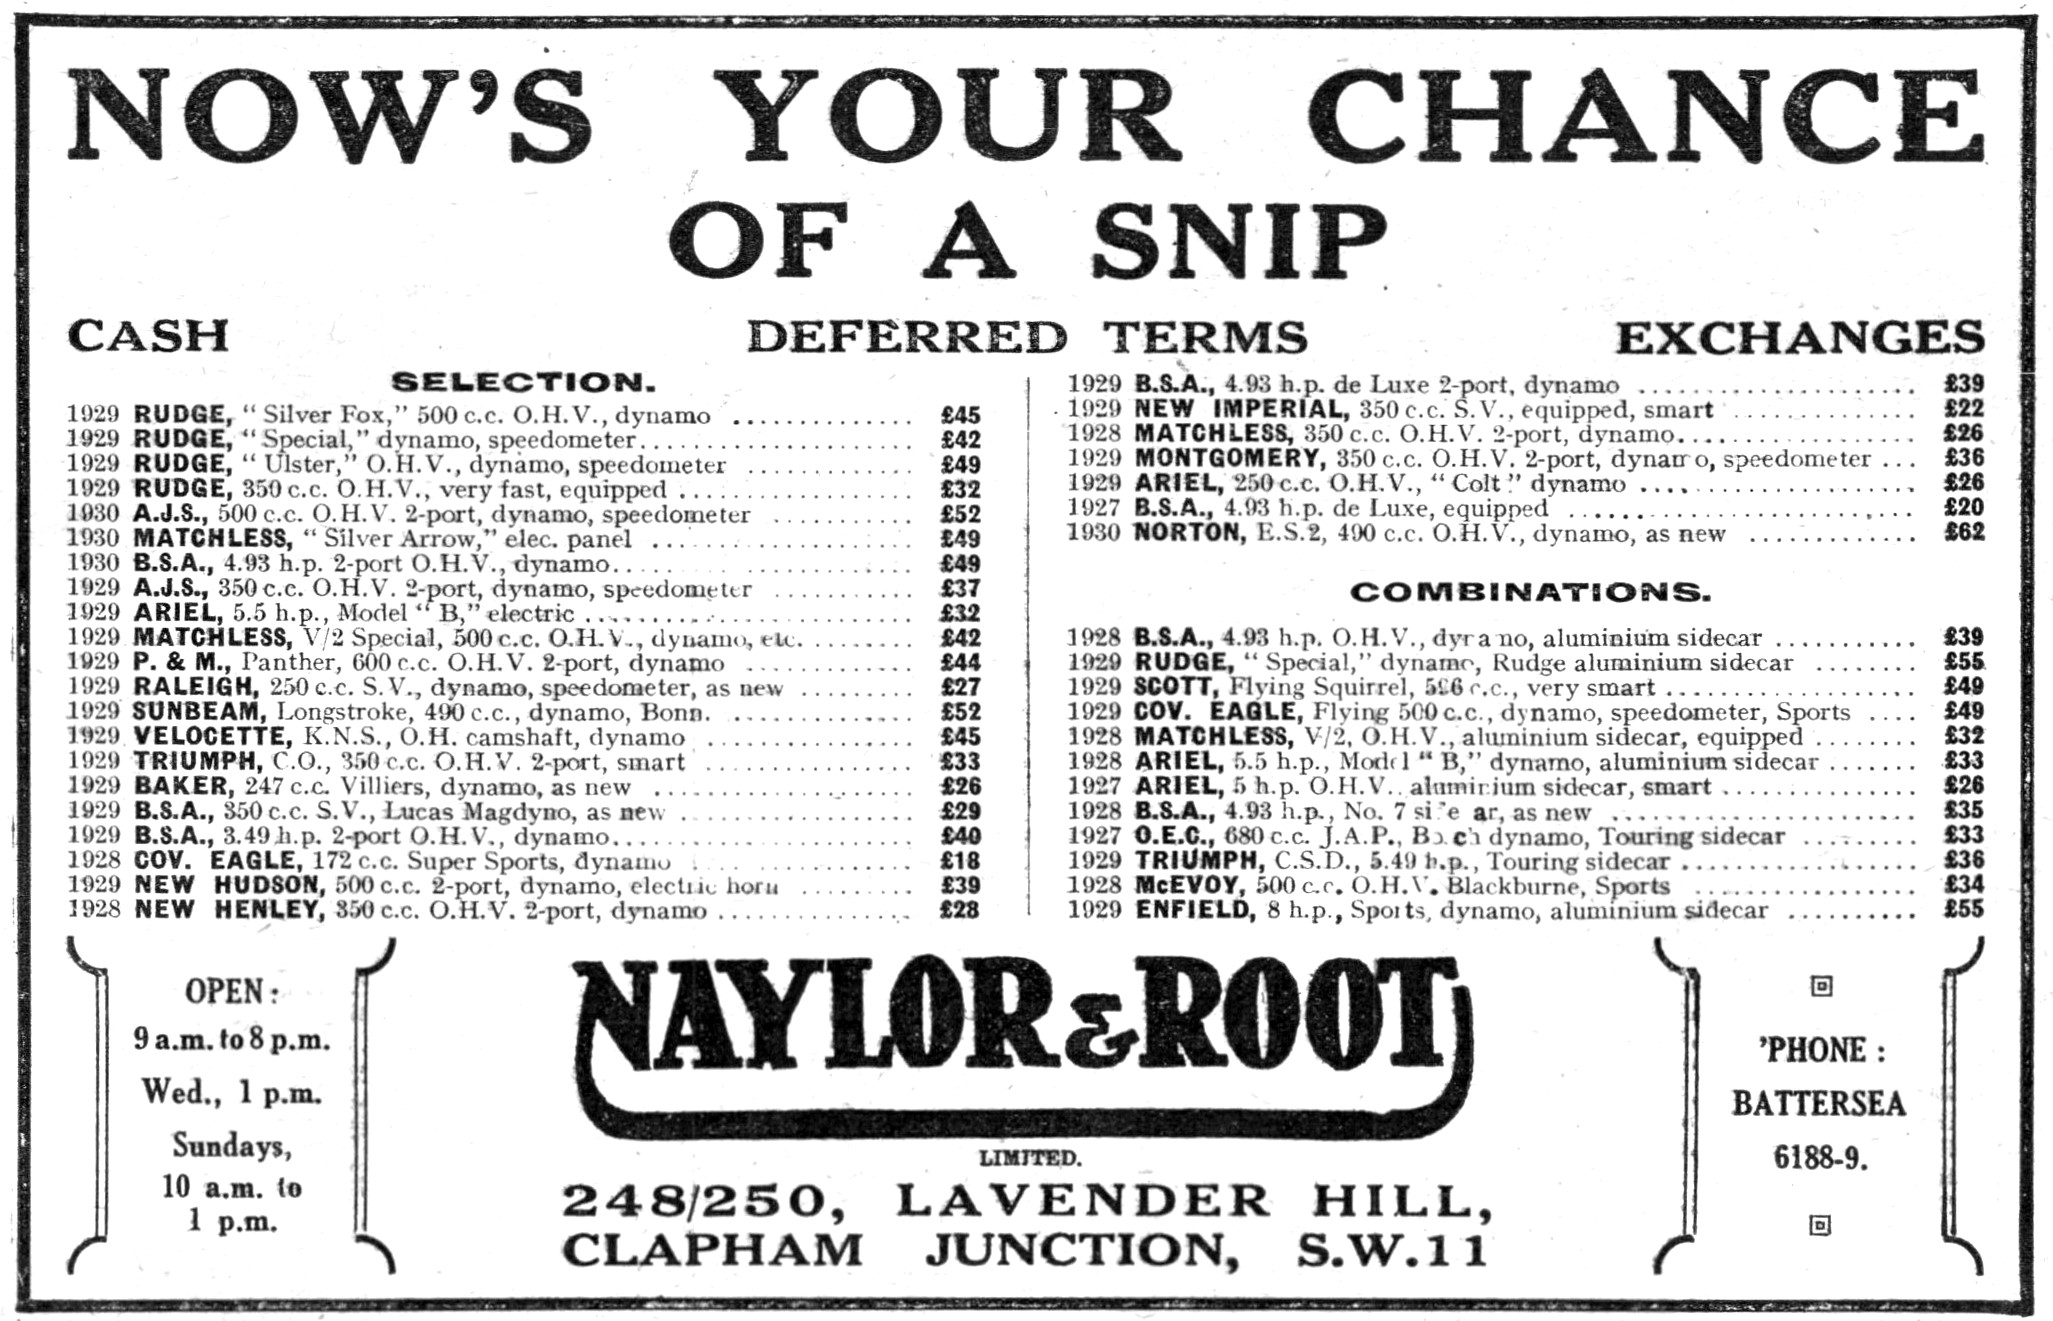 Naylor & Root. Lavender Hill. Motor Cycle Sales & Service 1930   